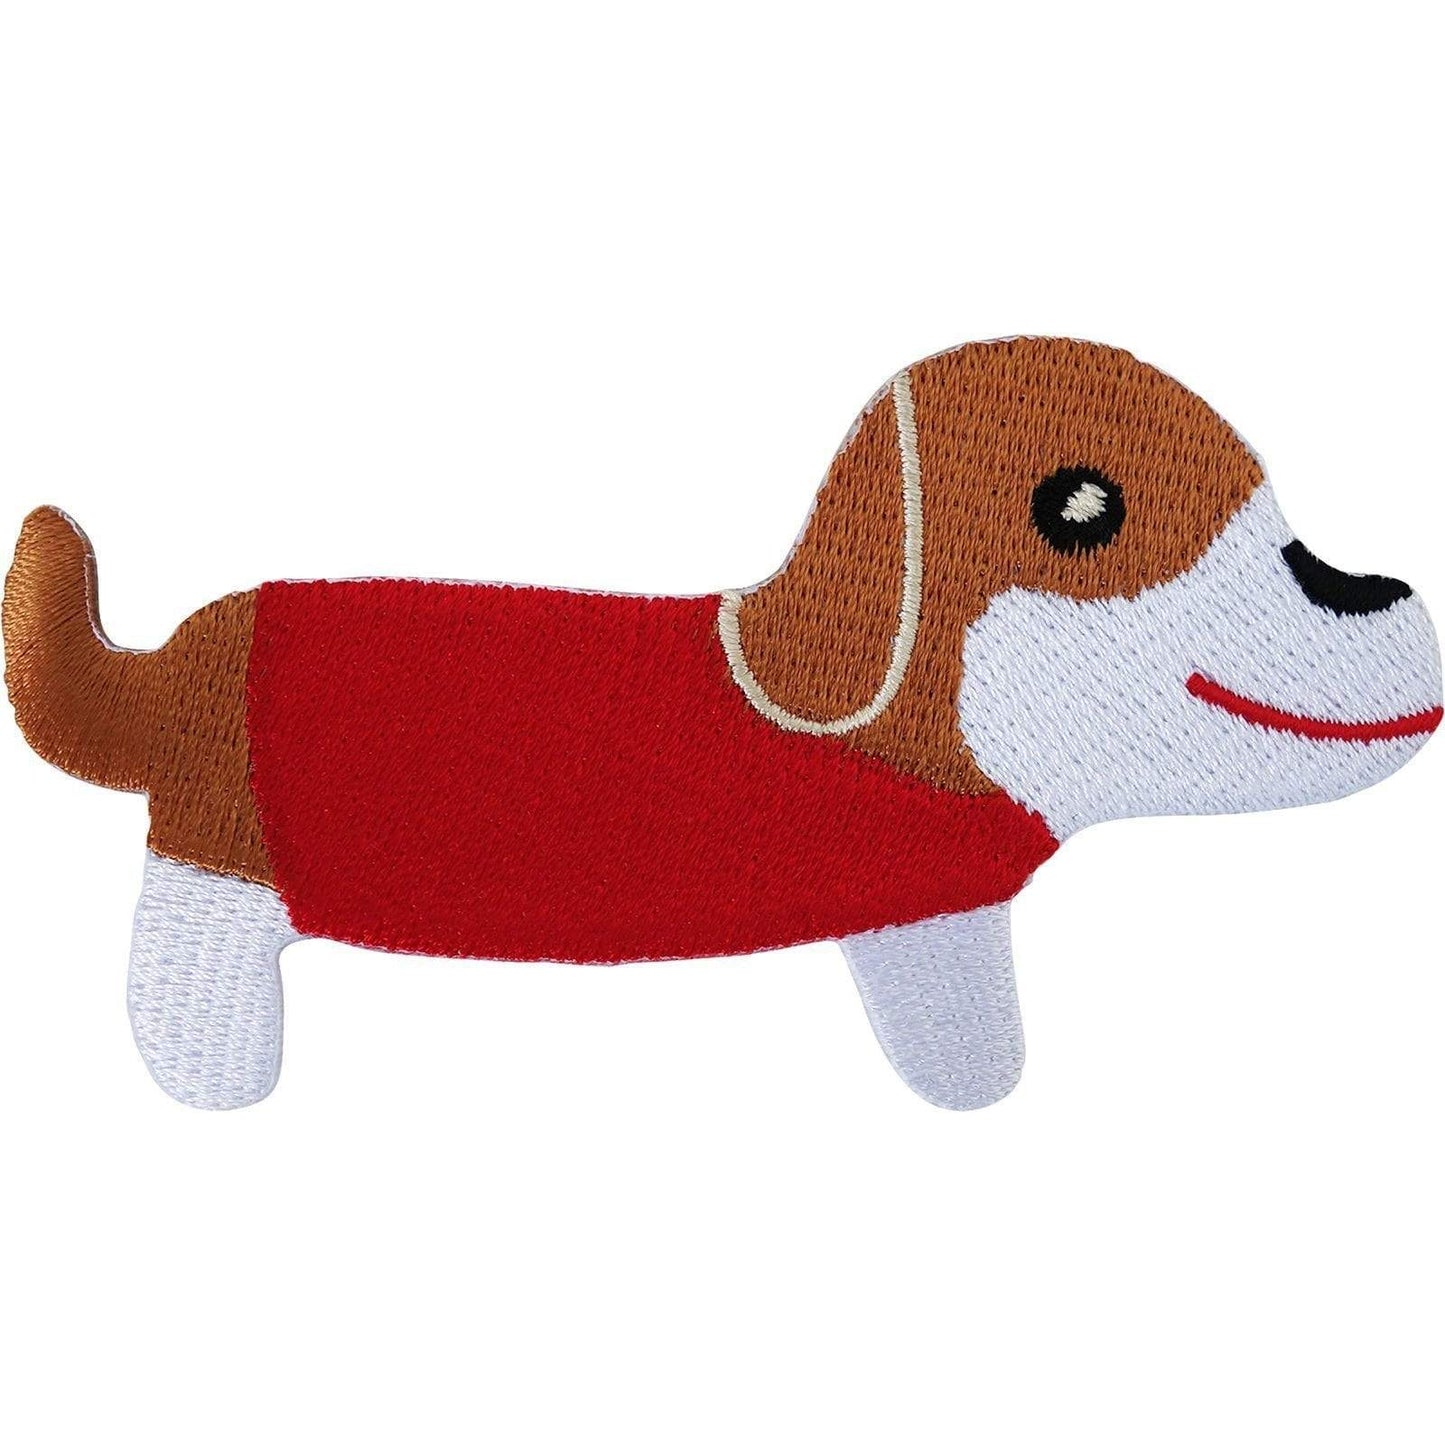 Dachshund Patch Sausage Dog Badge Embroidered Iron / Sew On Clothes Jacket Coat